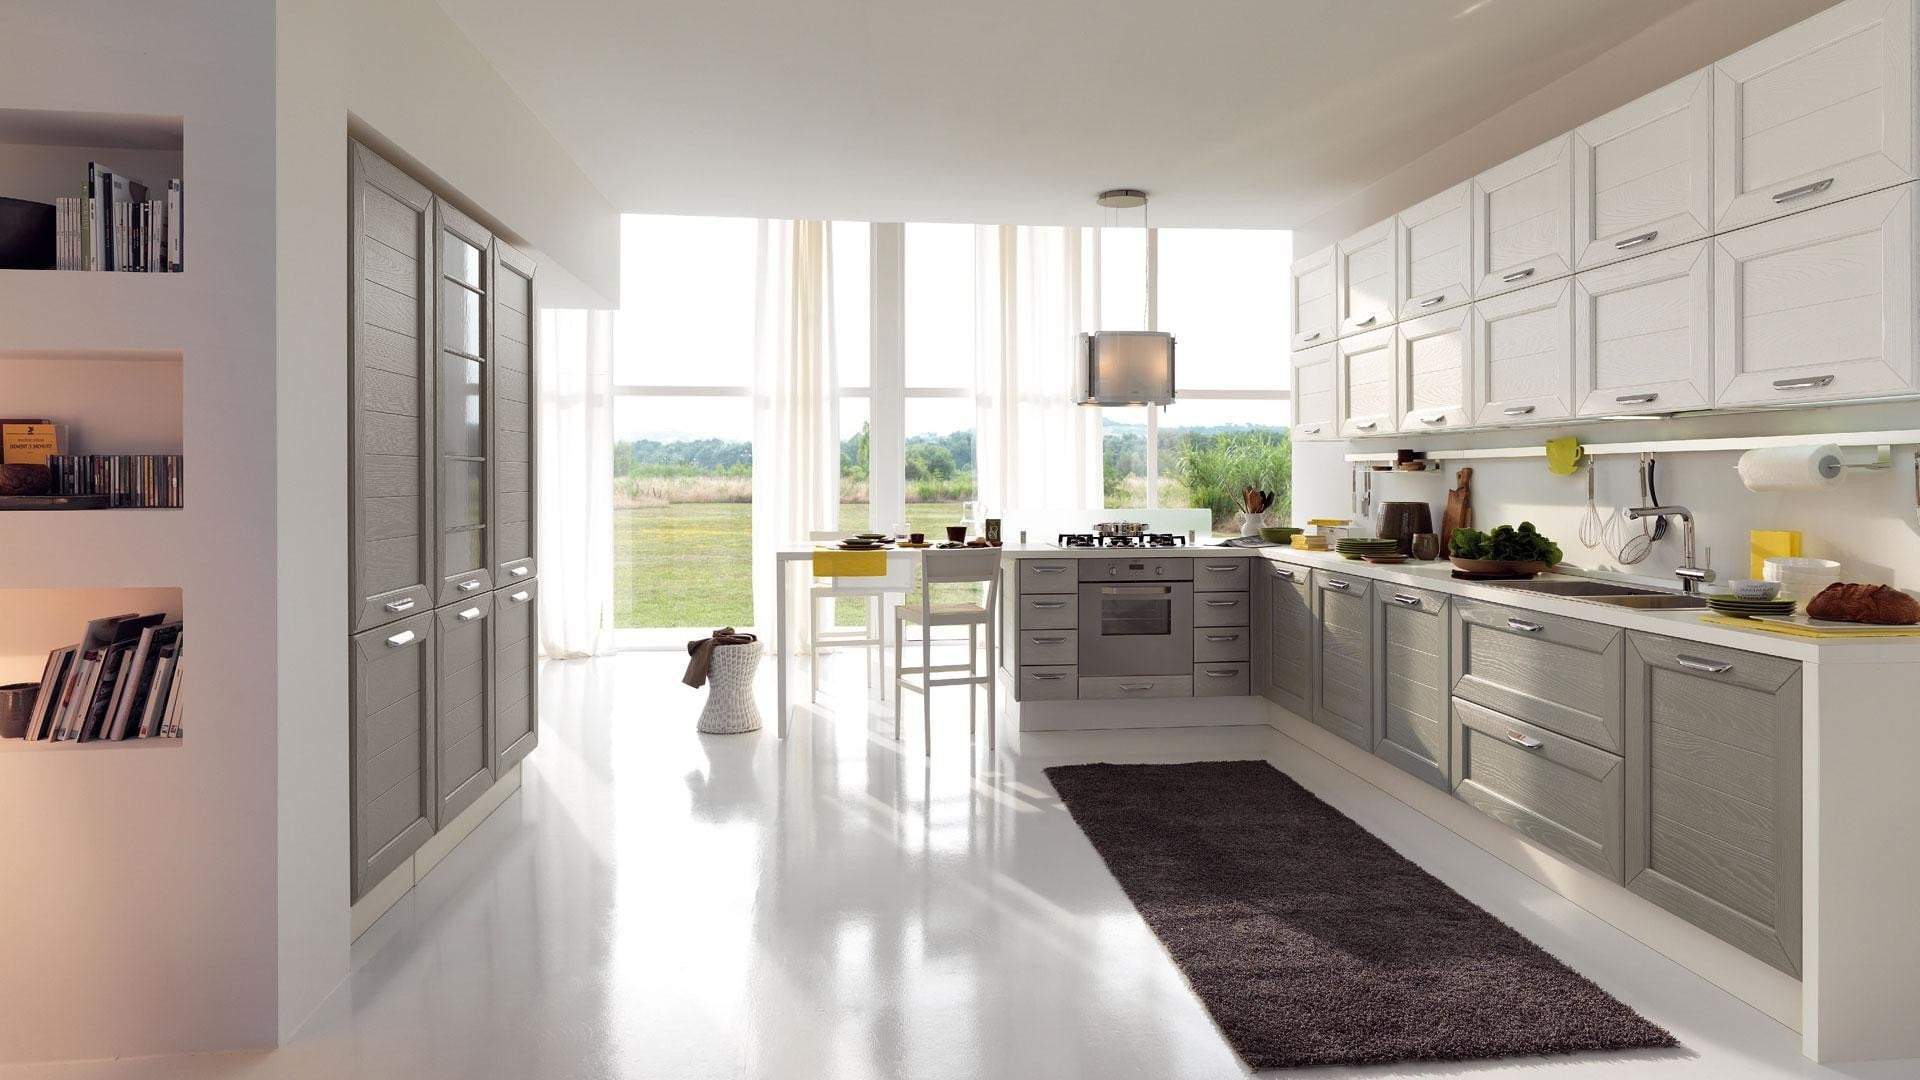 HOG on 3 steps to choosing kitchen finishes wisely